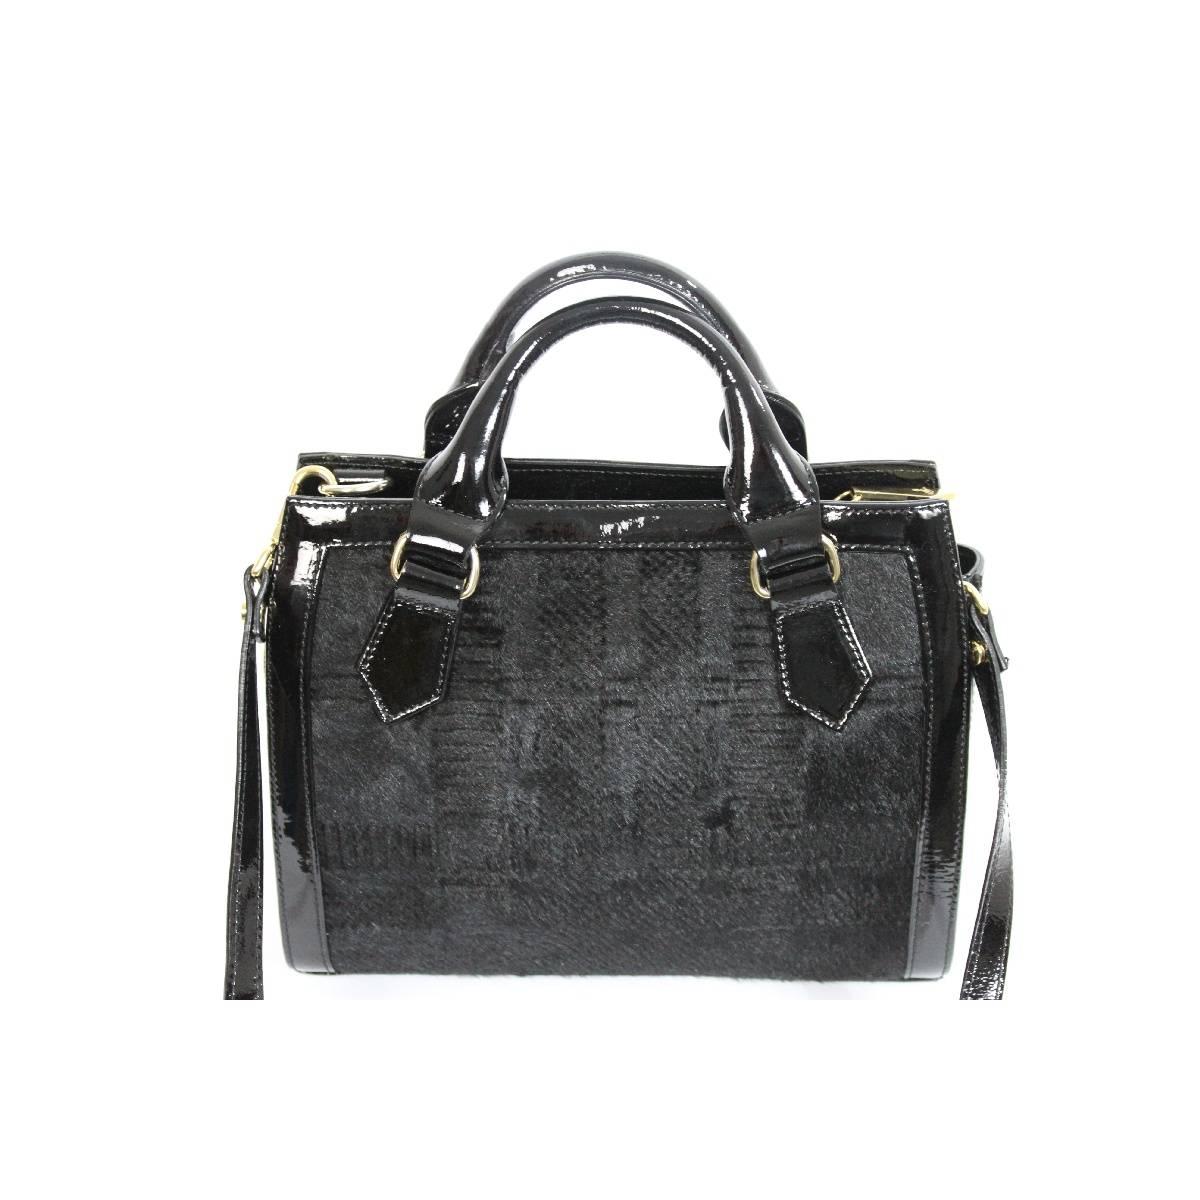 Vivienne Westwood black shoulder bag, leather and pony skin, patent leather trim, and gold trim, the bag can be used both by hand and shoulder as it has shoulder strap, excellent condition.

Measures:
Height: 22 cm
Width: 26 cm
Depth: 11